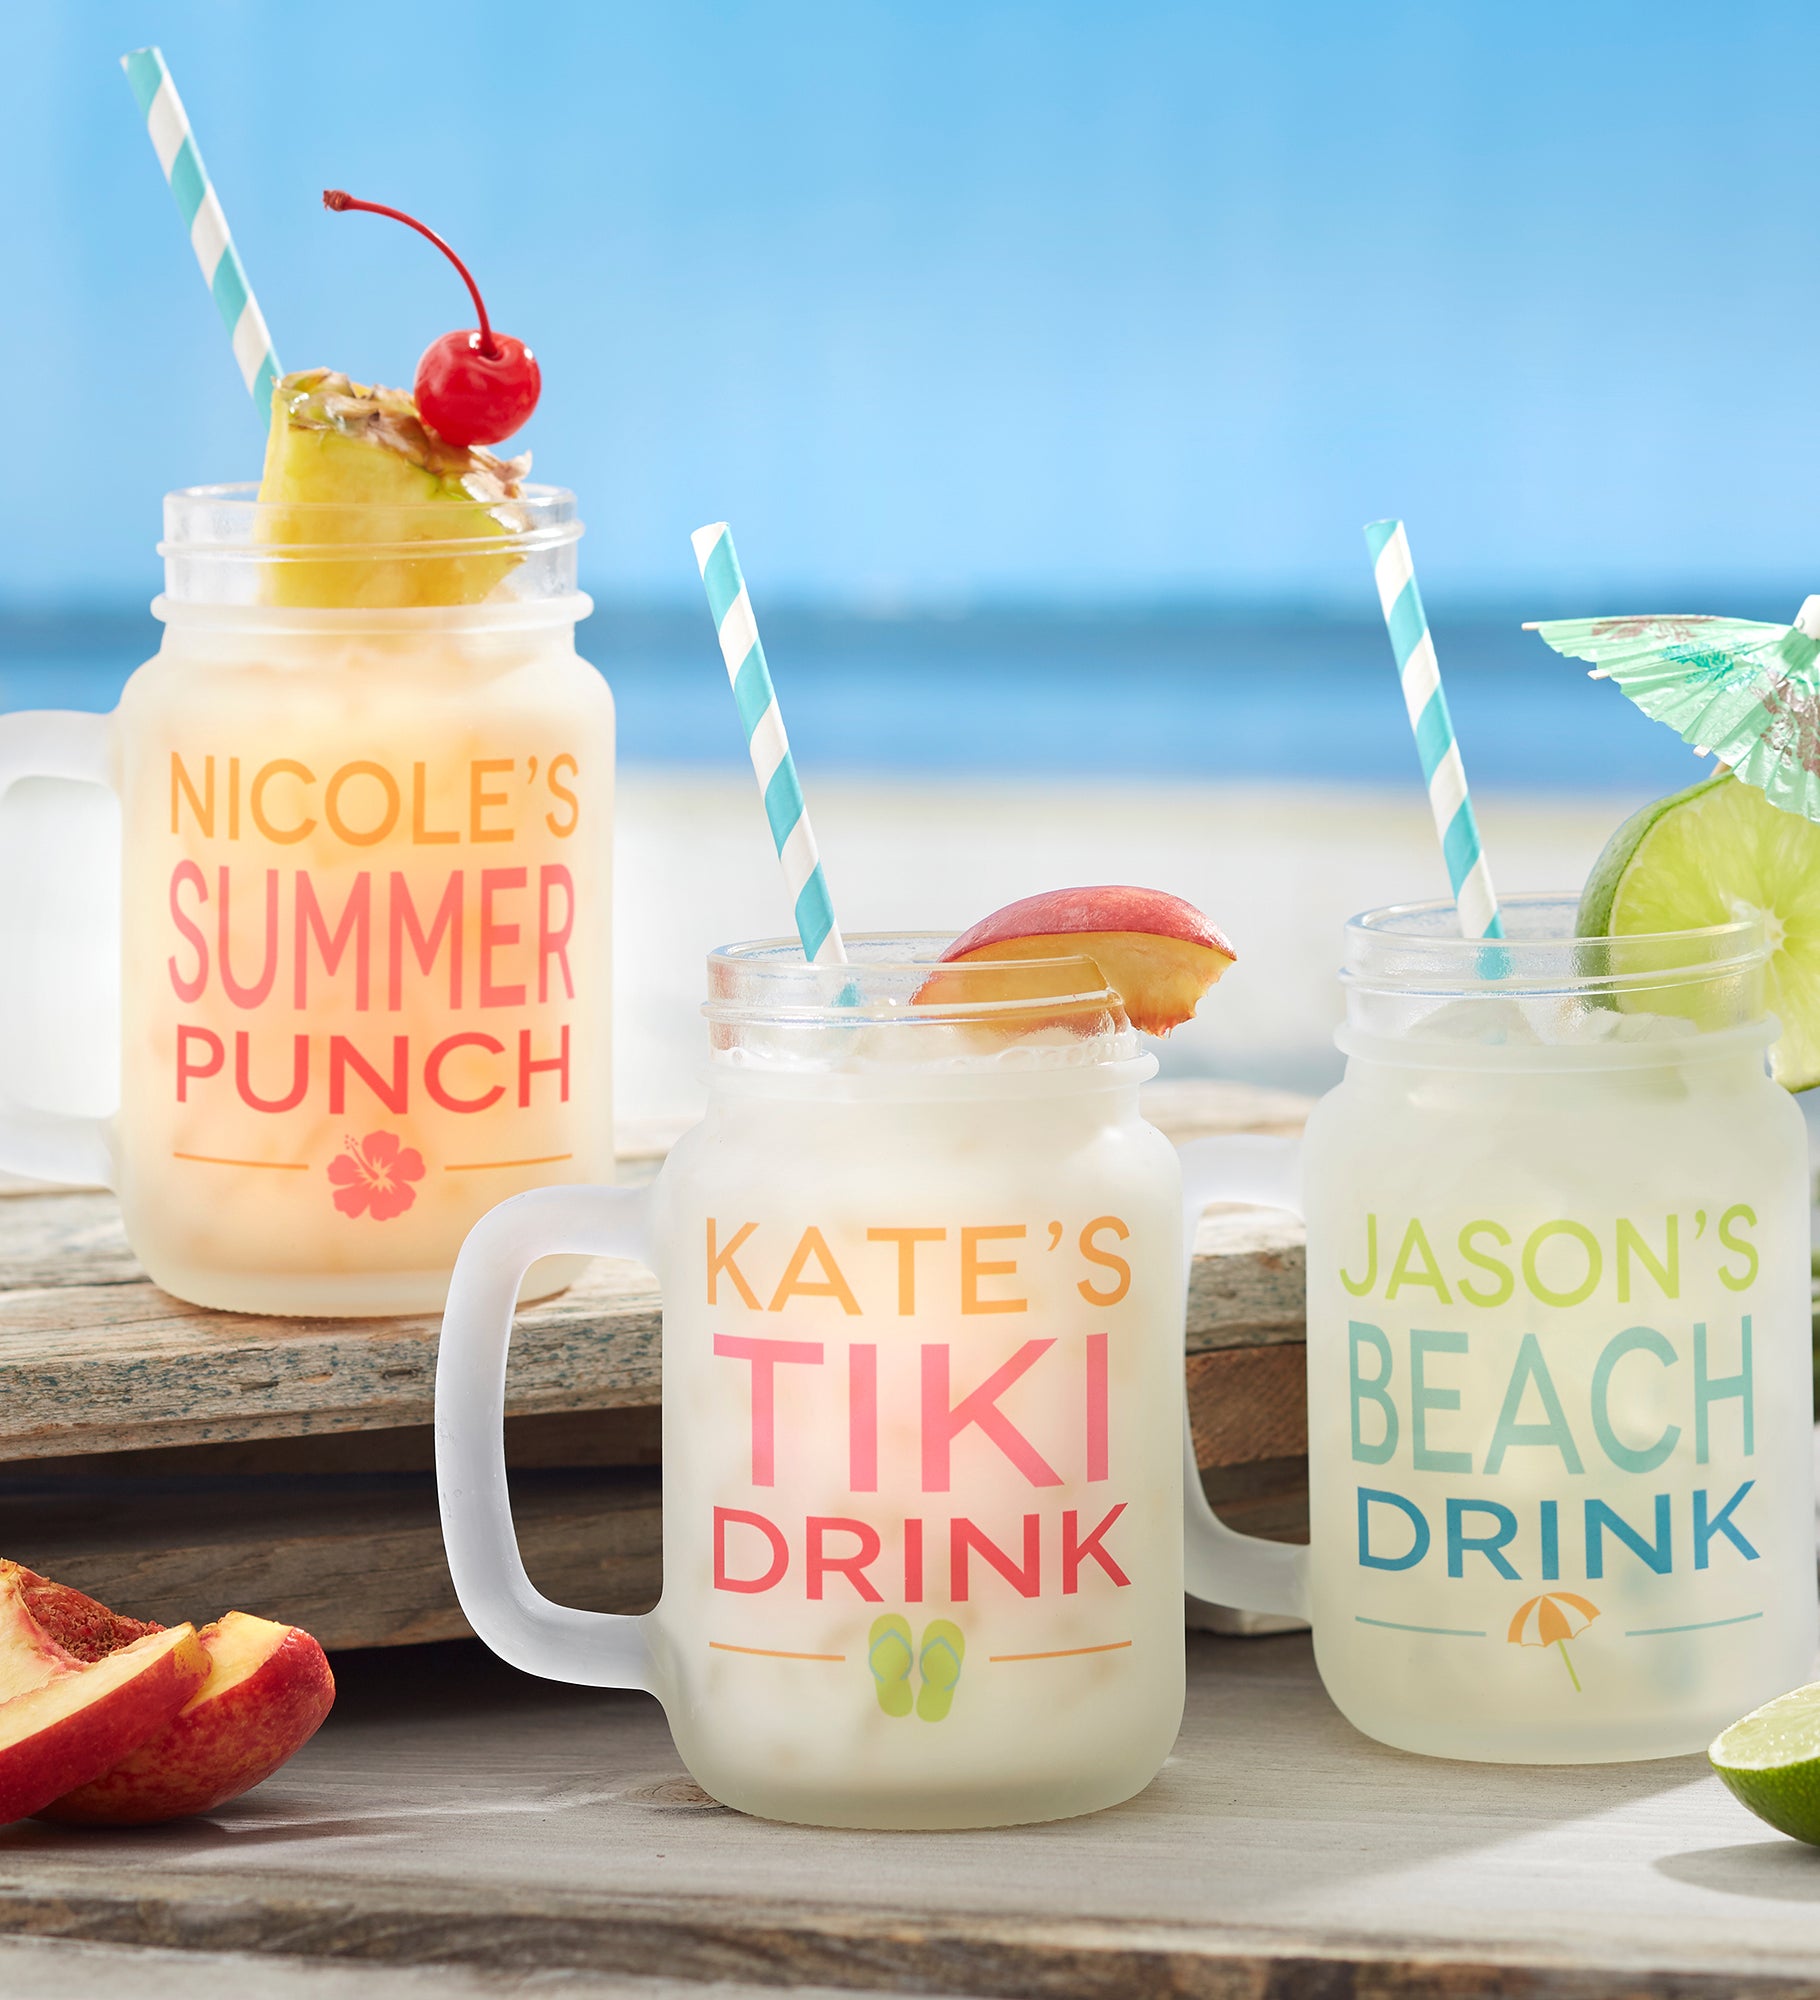 Summer Fun Personalized Frosted Mason Jar